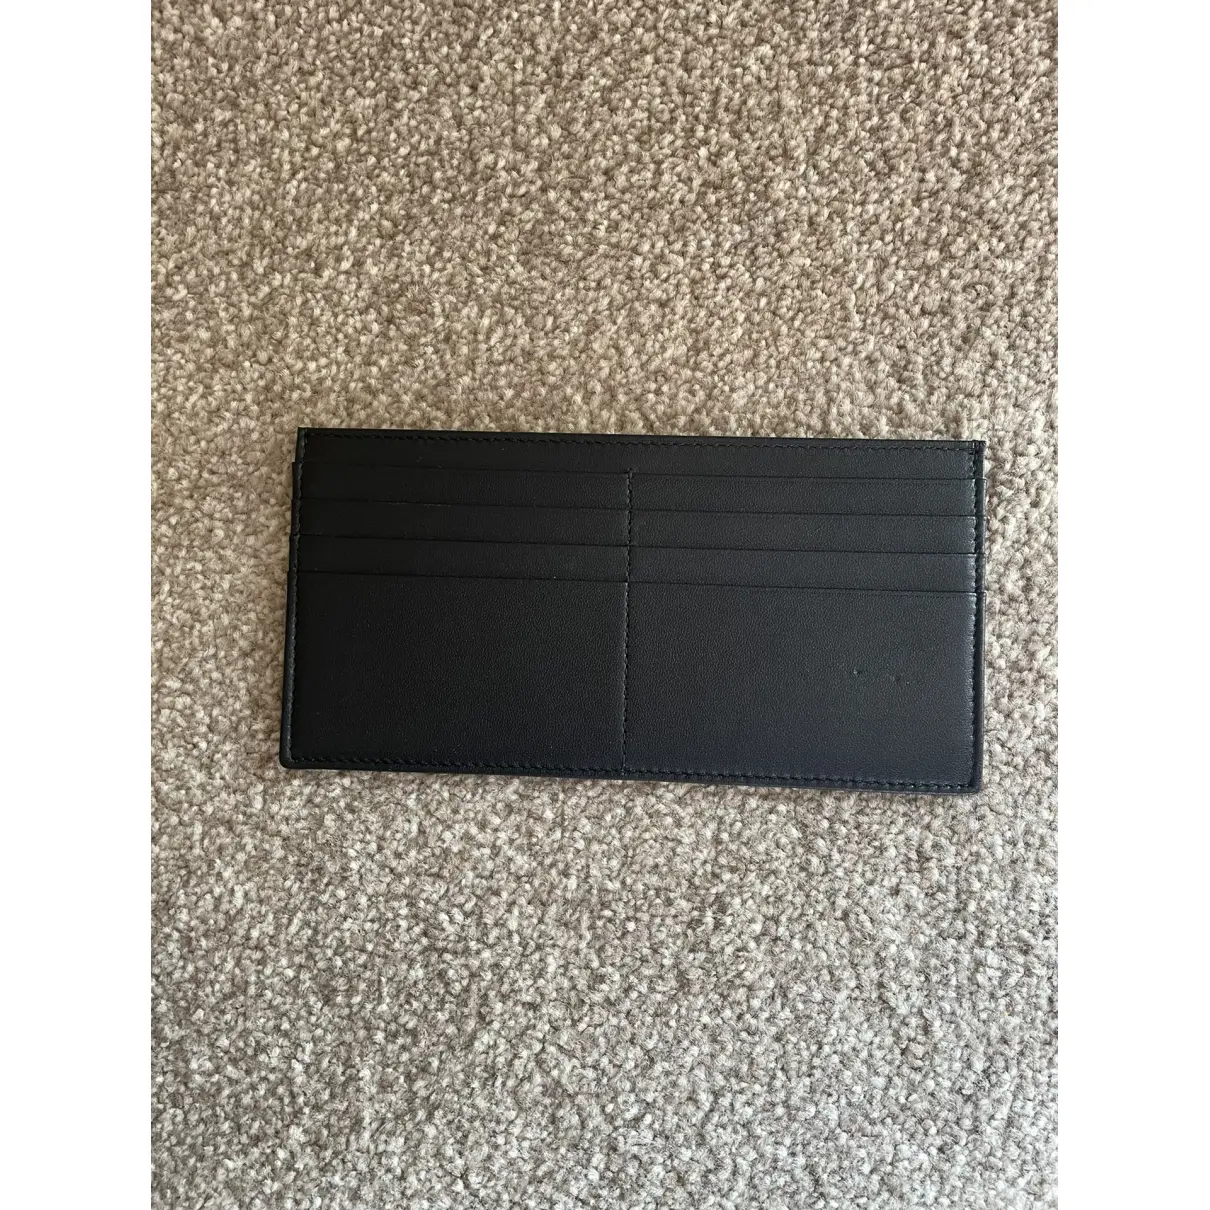 Buy Dior Lady Dior leather wallet online